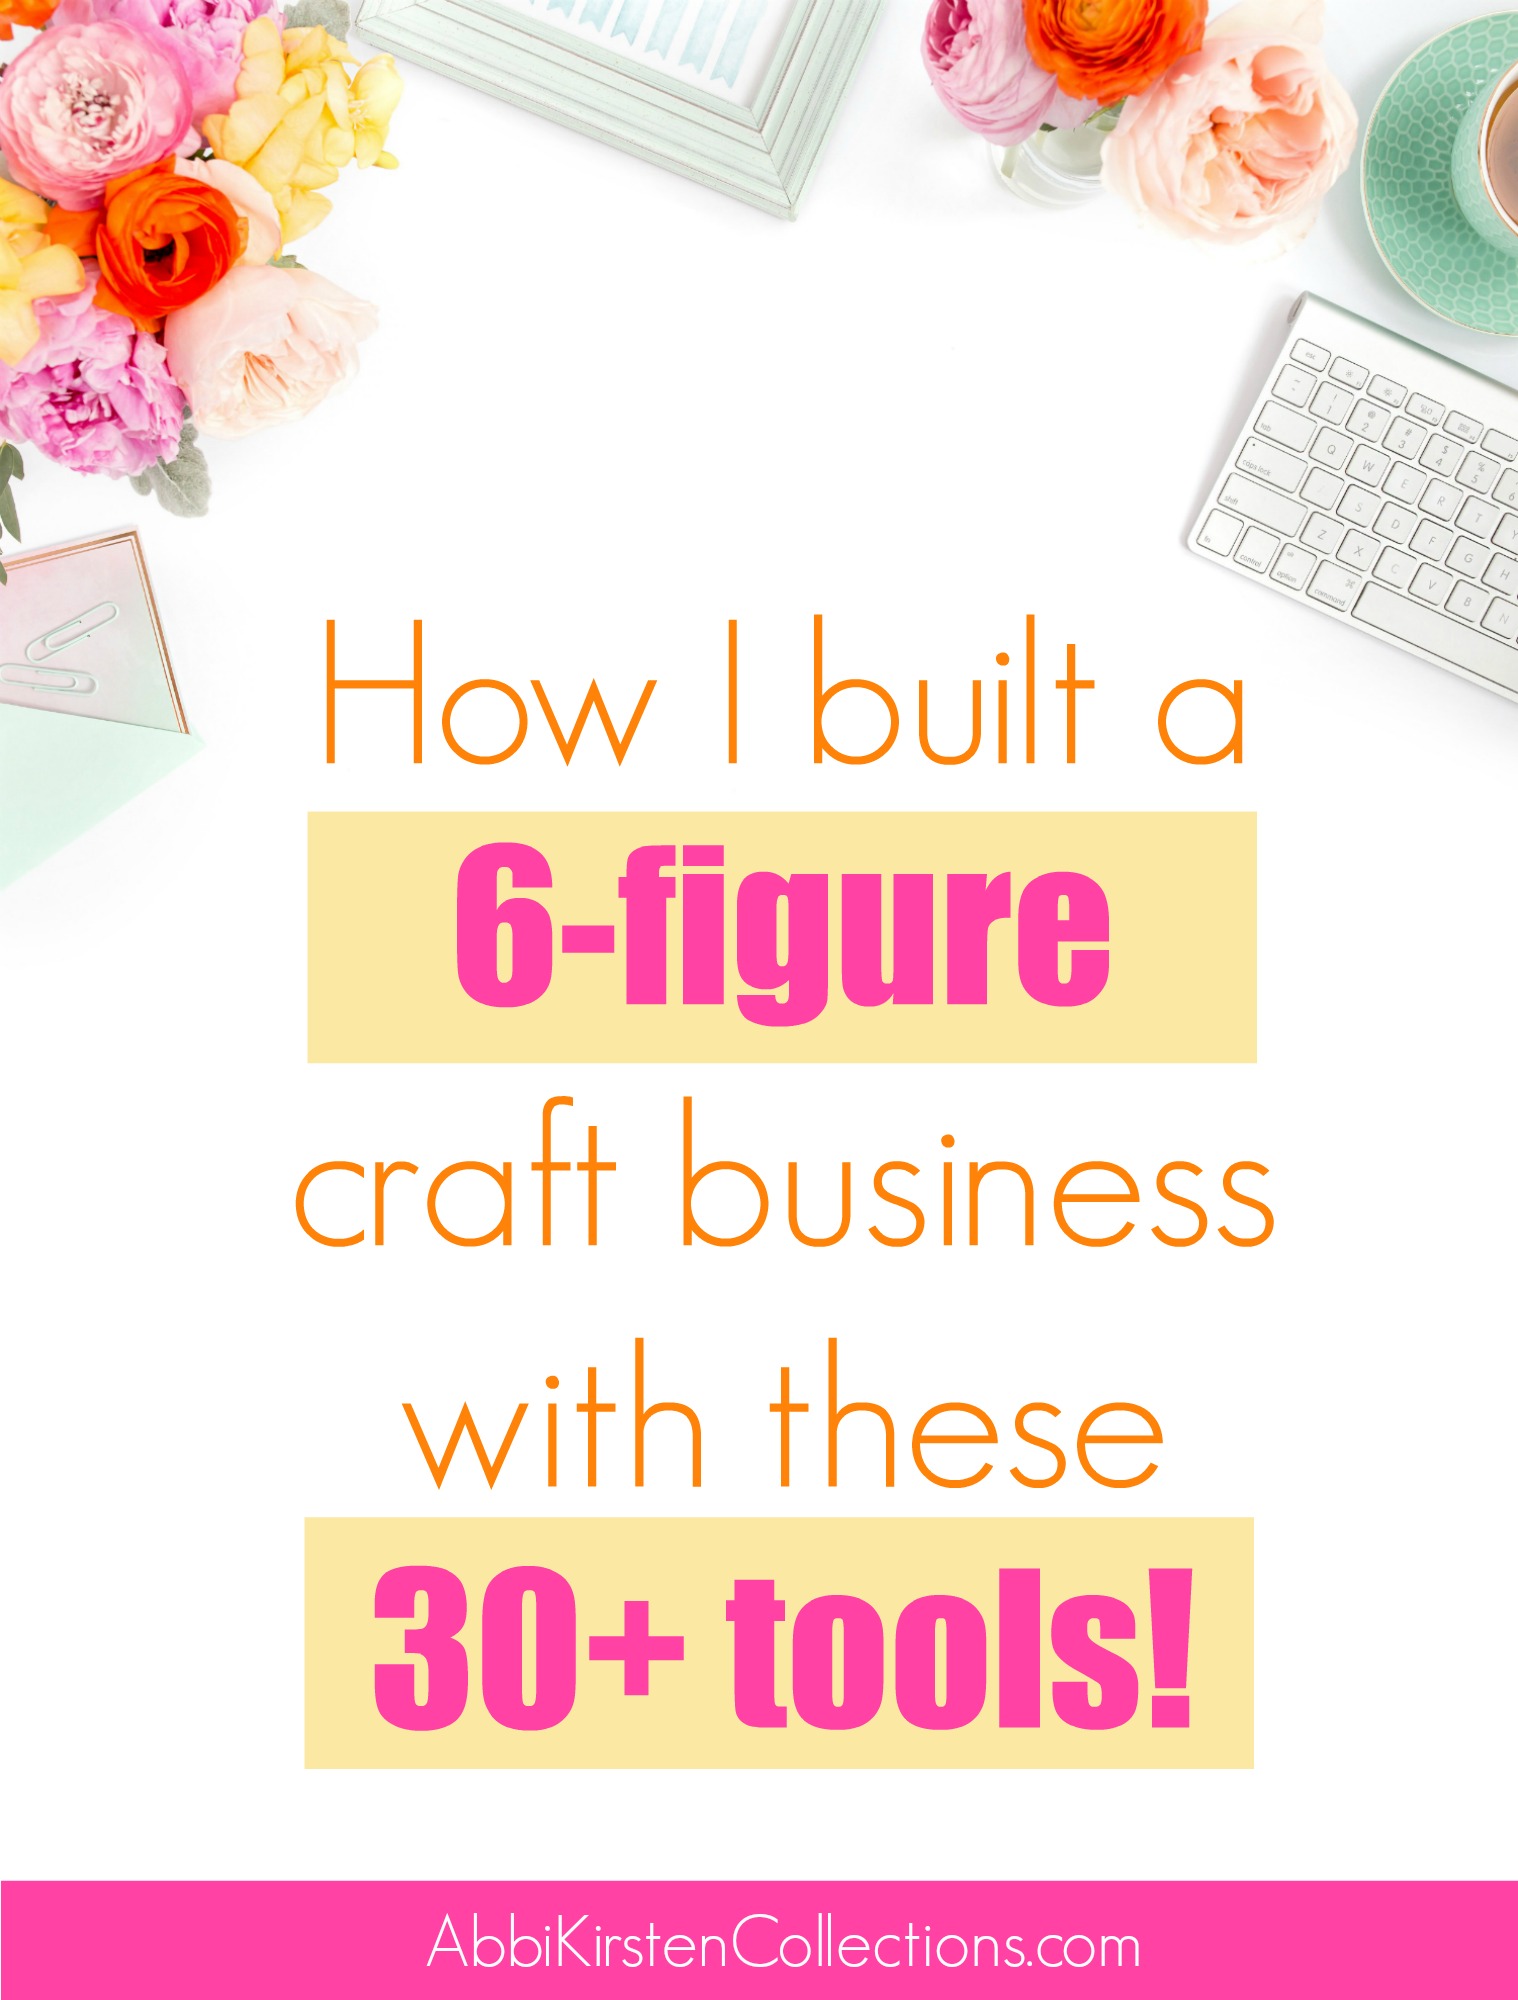 Starting a Home Craft Business: Learn how to build a successful small handmade or creative business from home with these top small business resources.